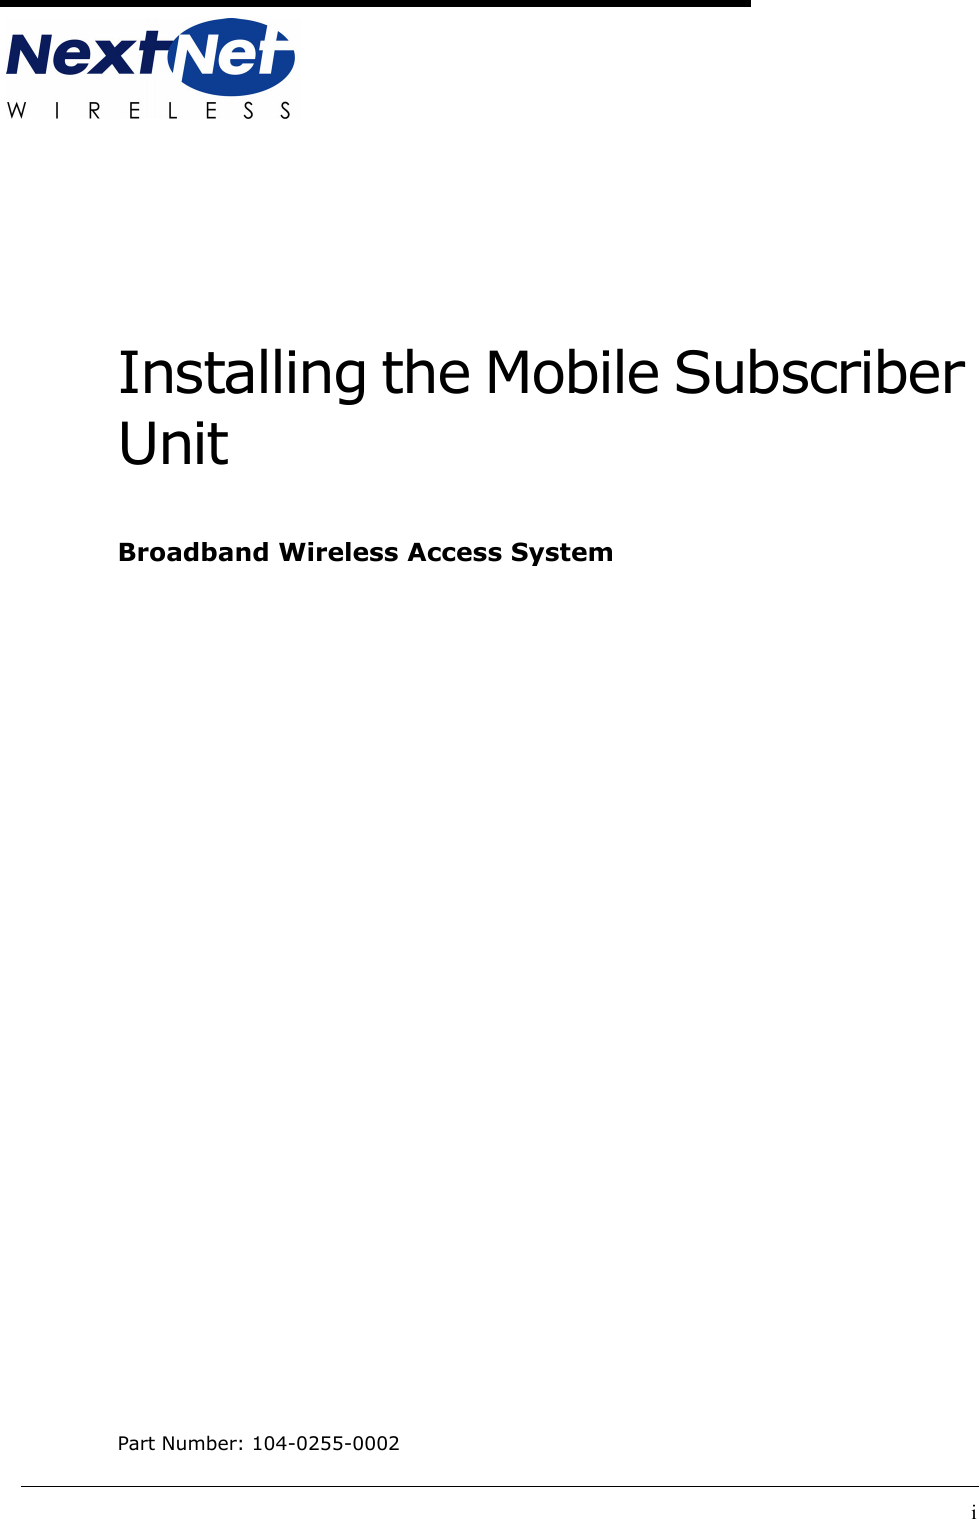 iInstalling the Mobile Subscriber UnitBroadband Wireless Access SystemPart Number: 104-0255-0002                                       